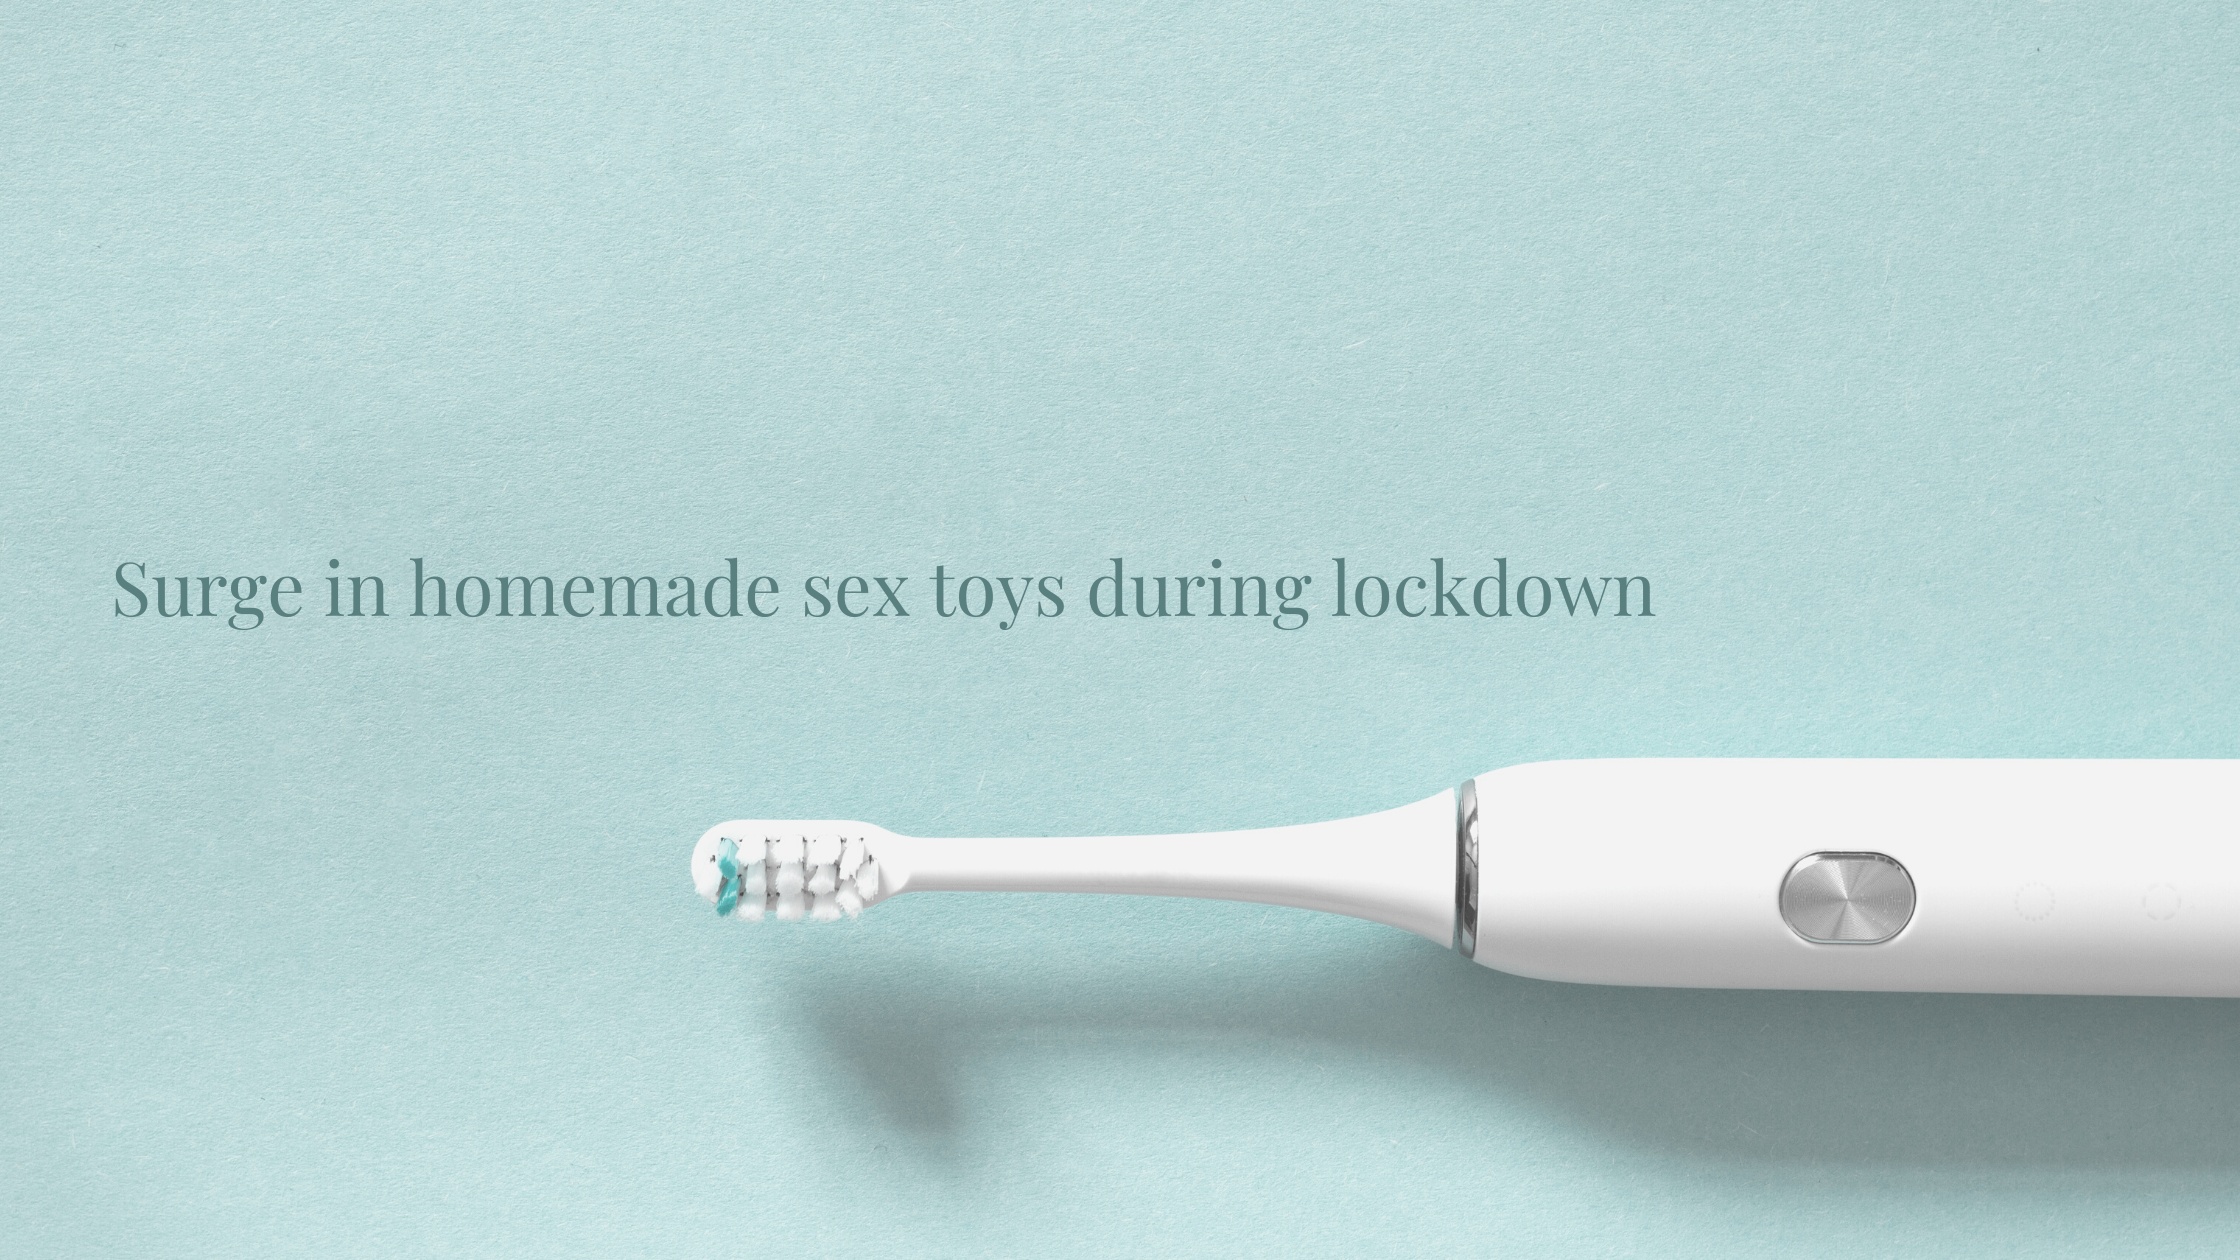 Surge in homemade sex toys during lockdown pic